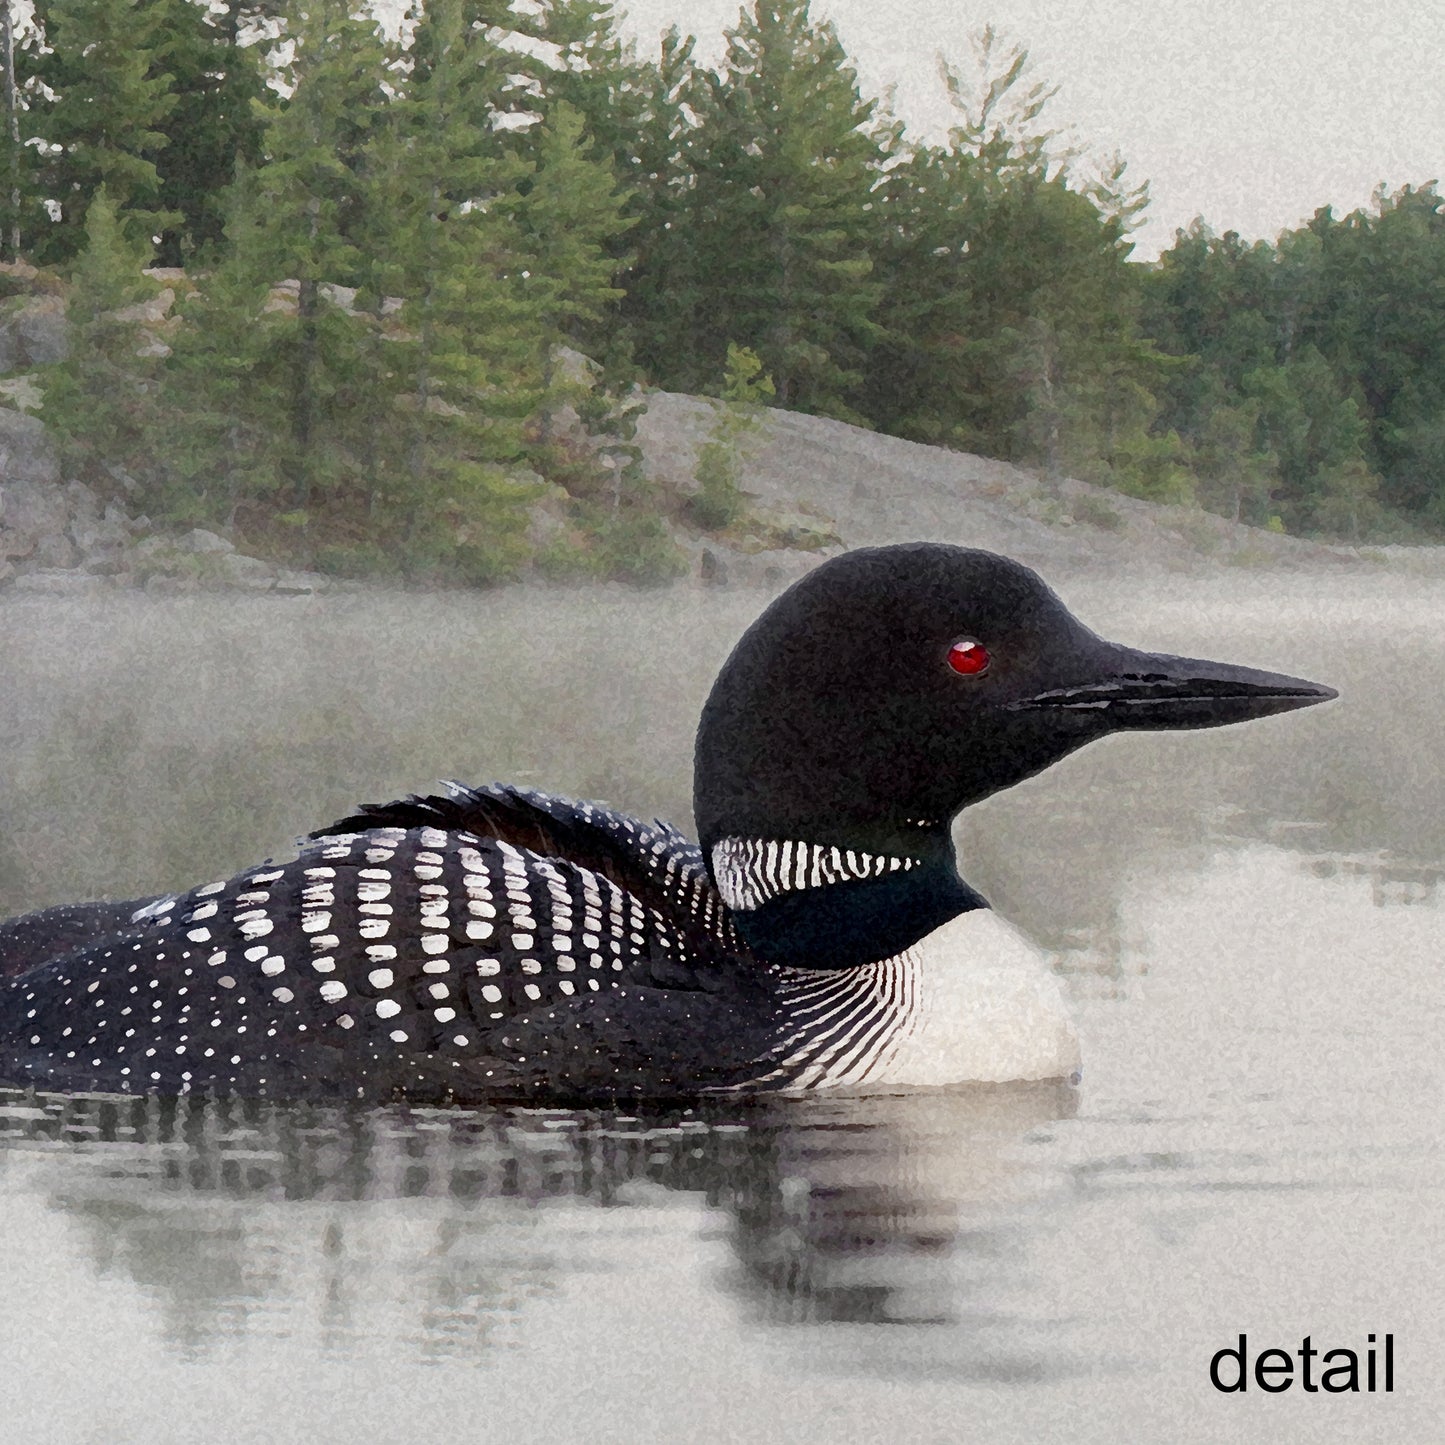 Loon on the Water Wrapped Canvas Print